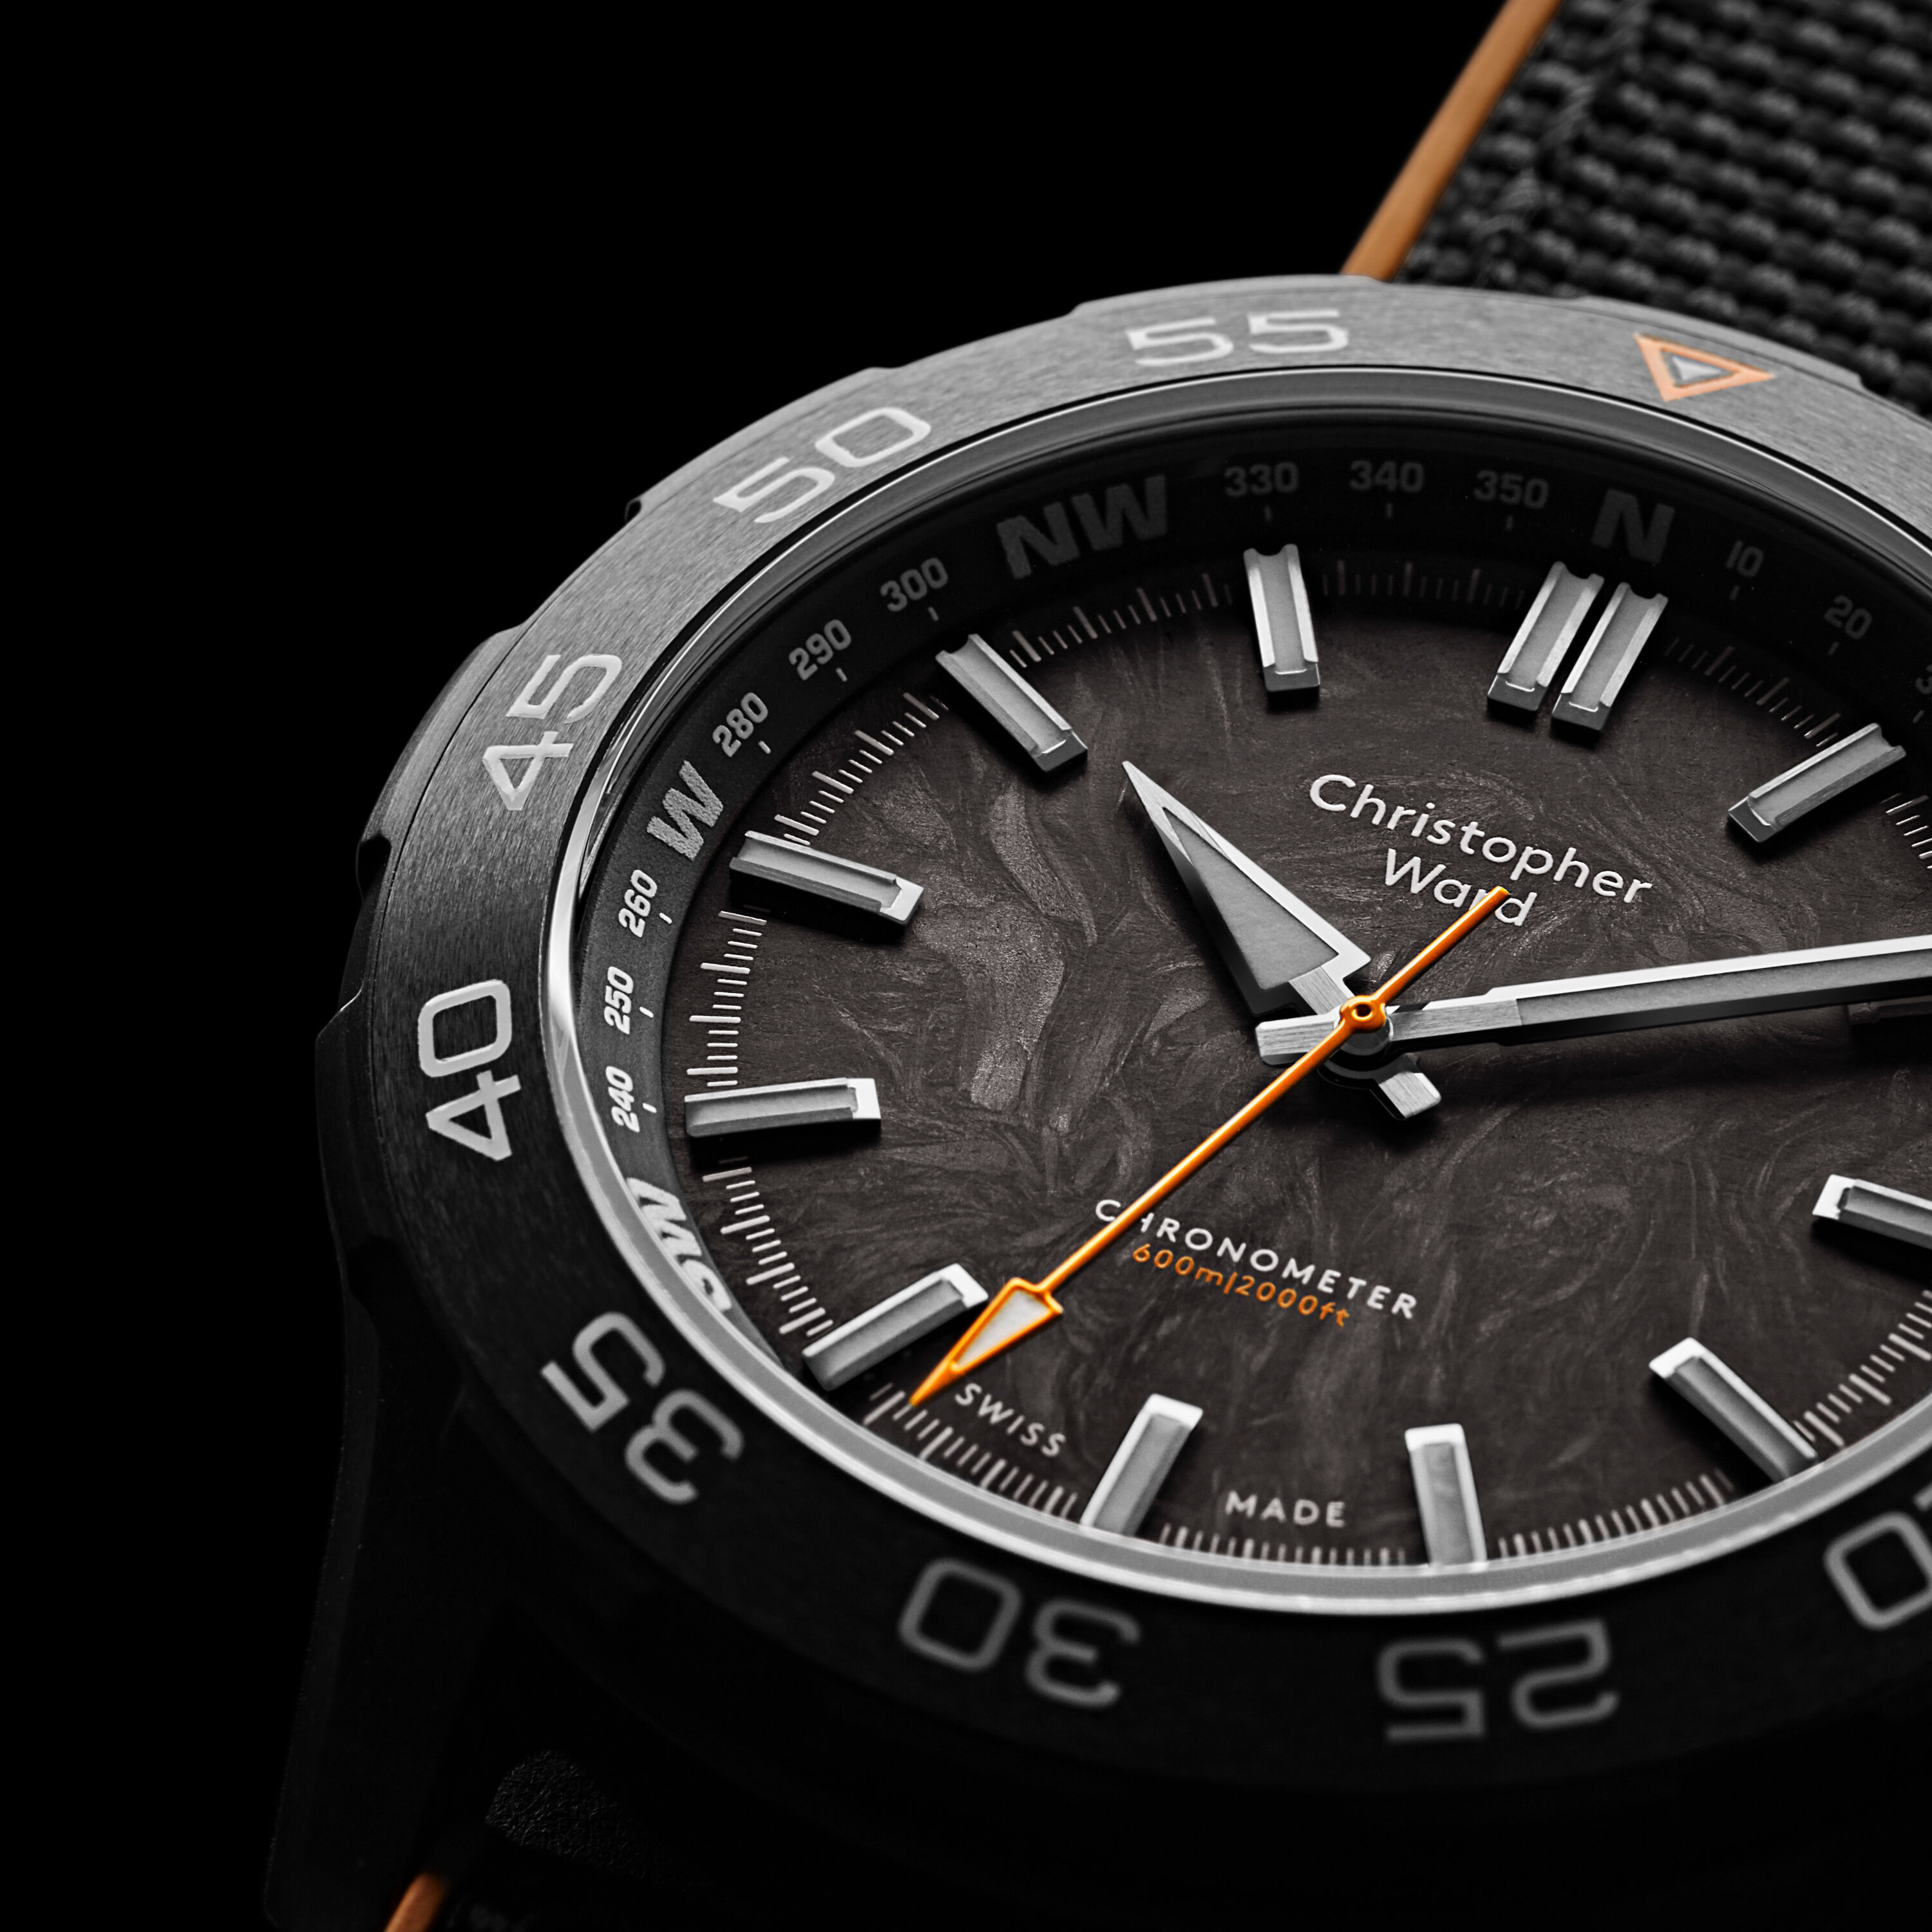 Christopher Ward C60 Elite 1000 Watch Review - 12&60